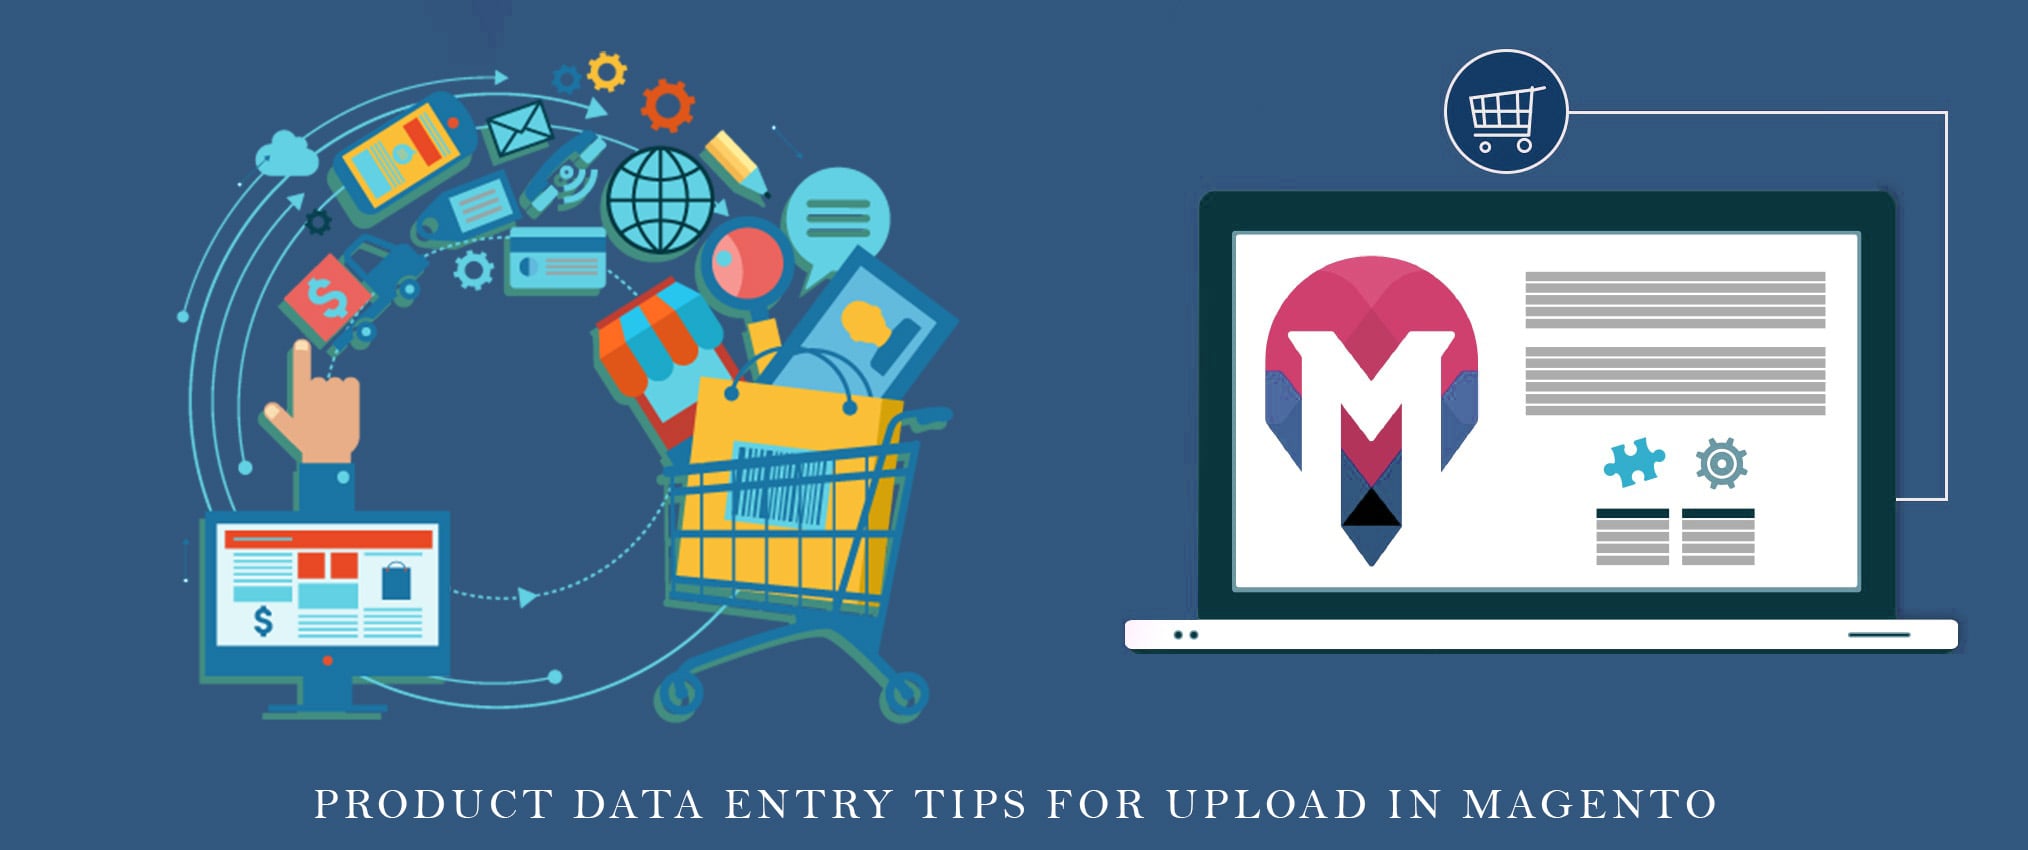 magento-product-data-entry-tip